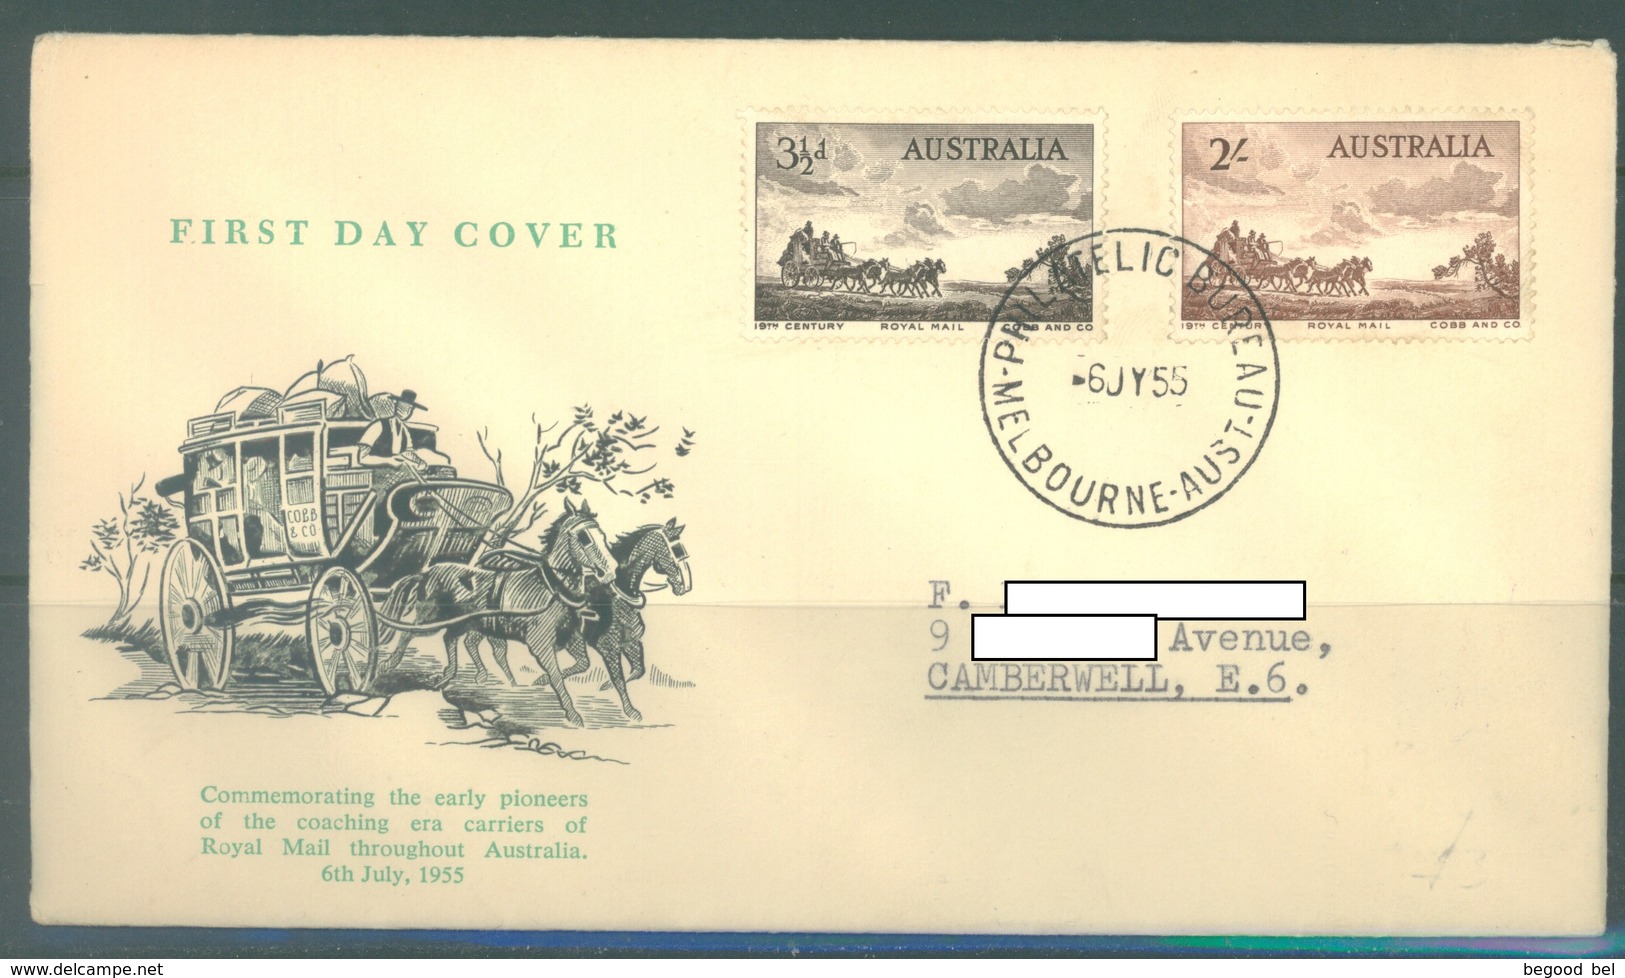 AUSTRALIA -  FDC  - 6.6.1955 - EARLY PIONEERS - Yv 220-221 - Lot 19380 - Premiers Jours (FDC)